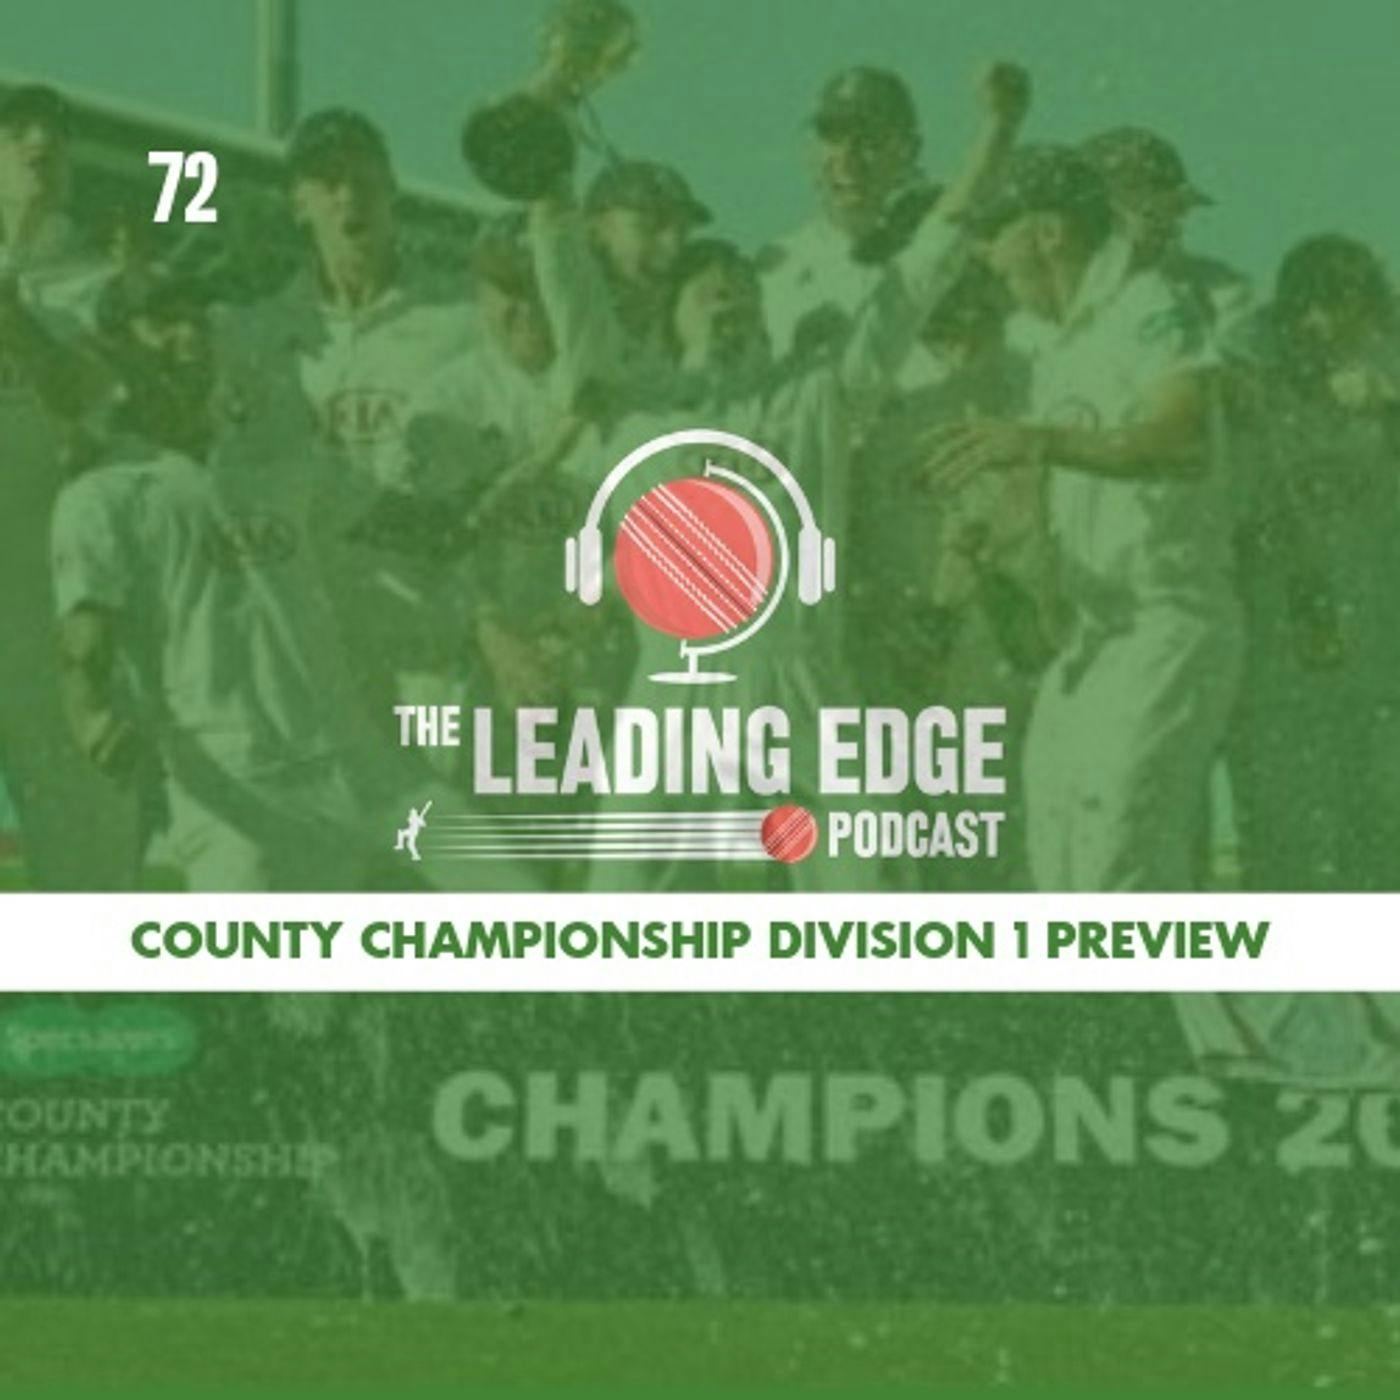 COUNTY CHAMPIONSHIP 2019 DIVISION 1 PREVIEW | Leading Edge Cricket Podcast | EP72